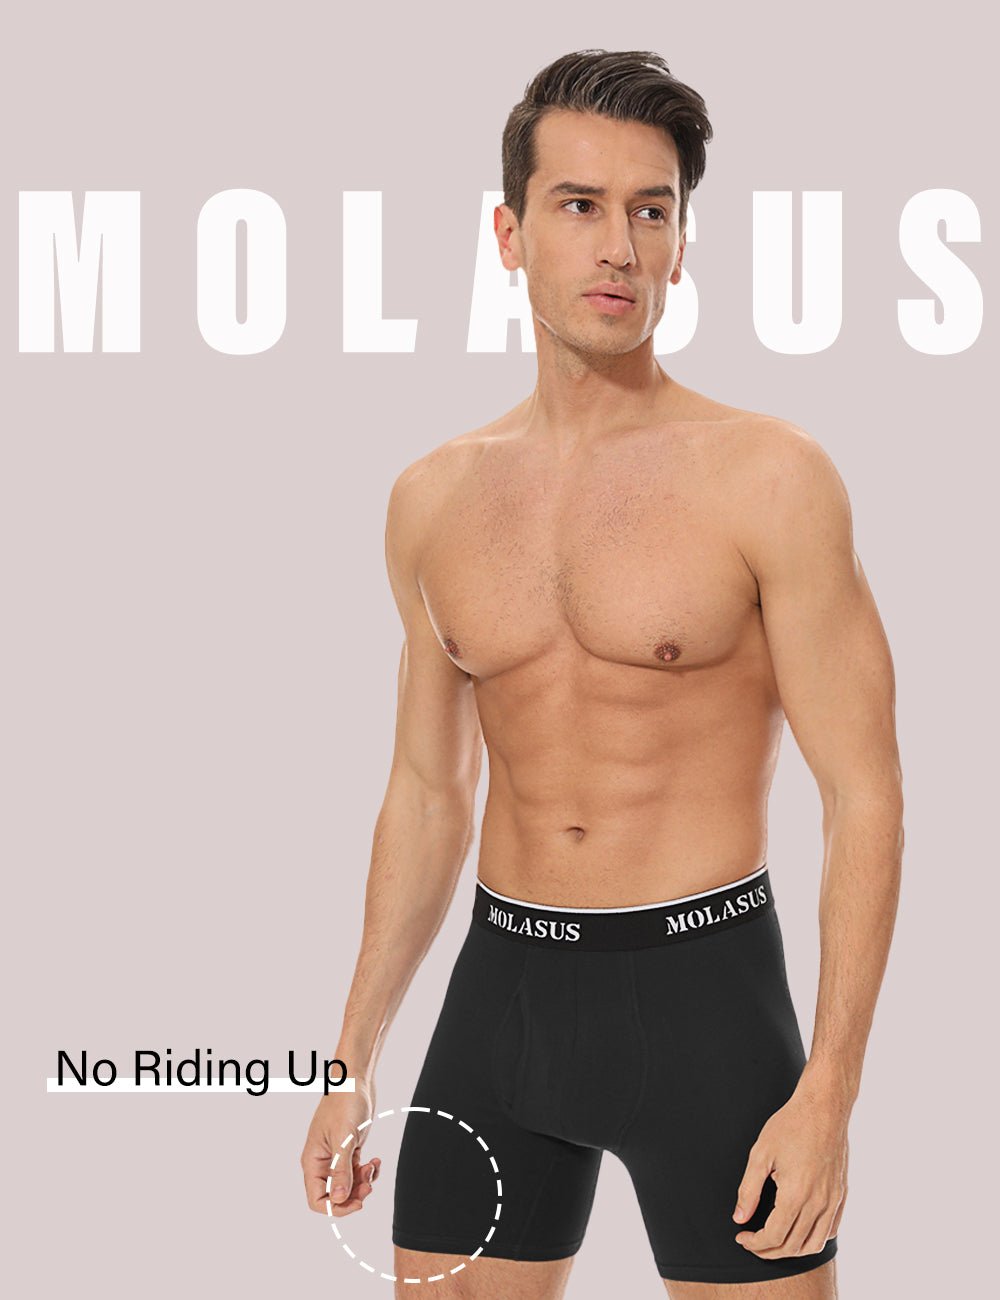 Molasus Mens Boxer Briefs Soft Cotton Underwear Open Fly Tagless Underpants Pack of 5 Black